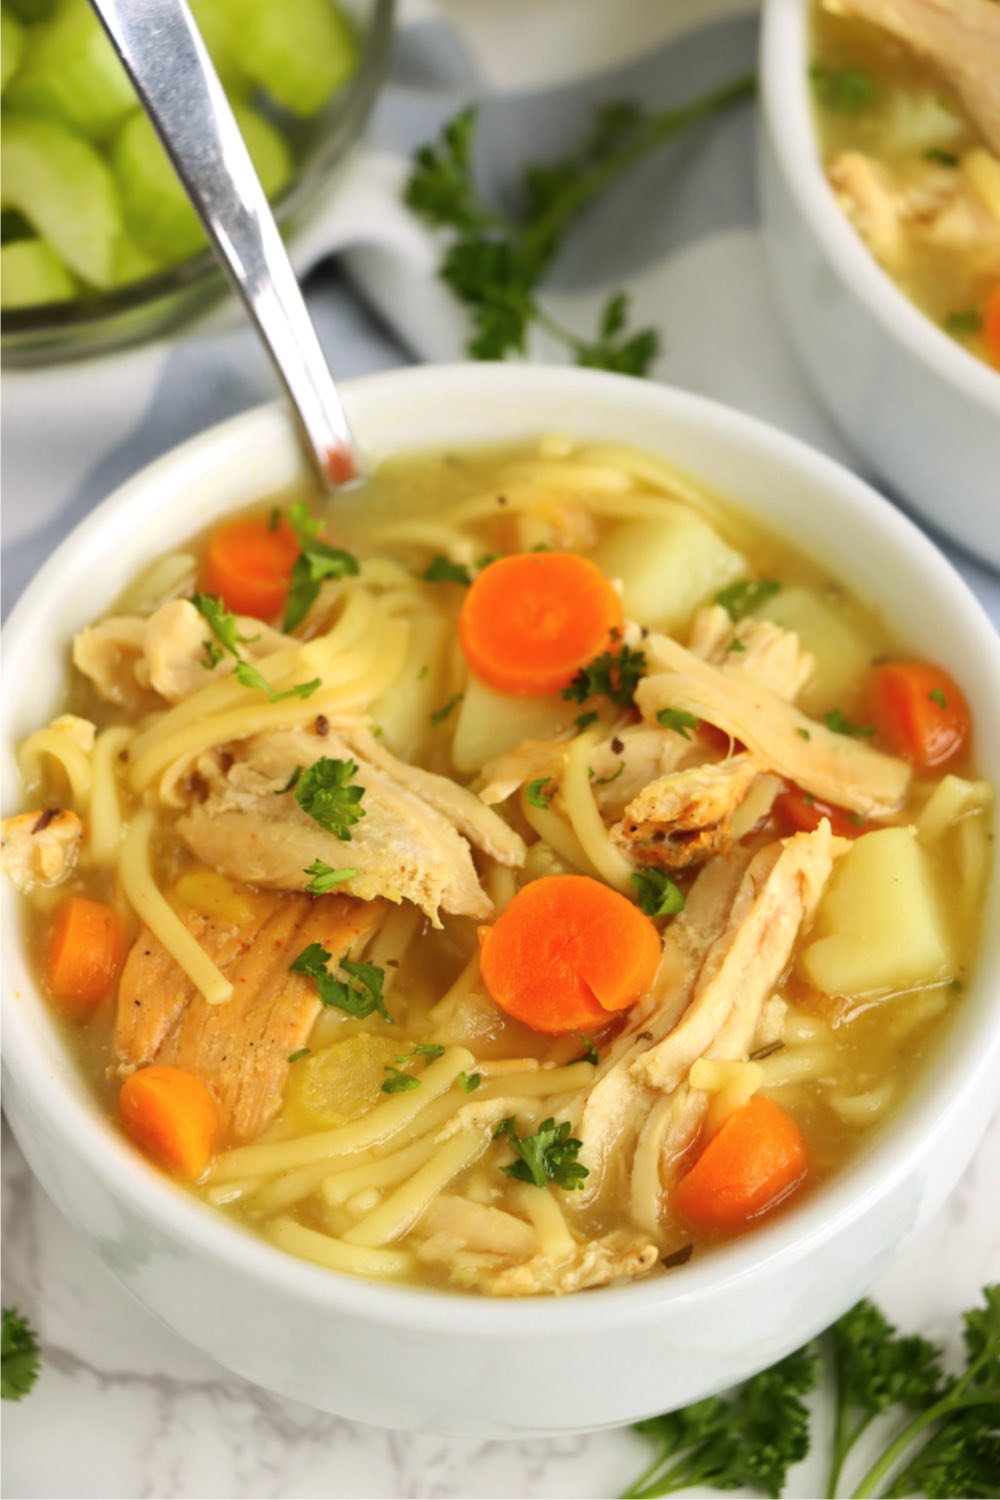 spoon in a bowl of turkey noodle soup filled with vegetables